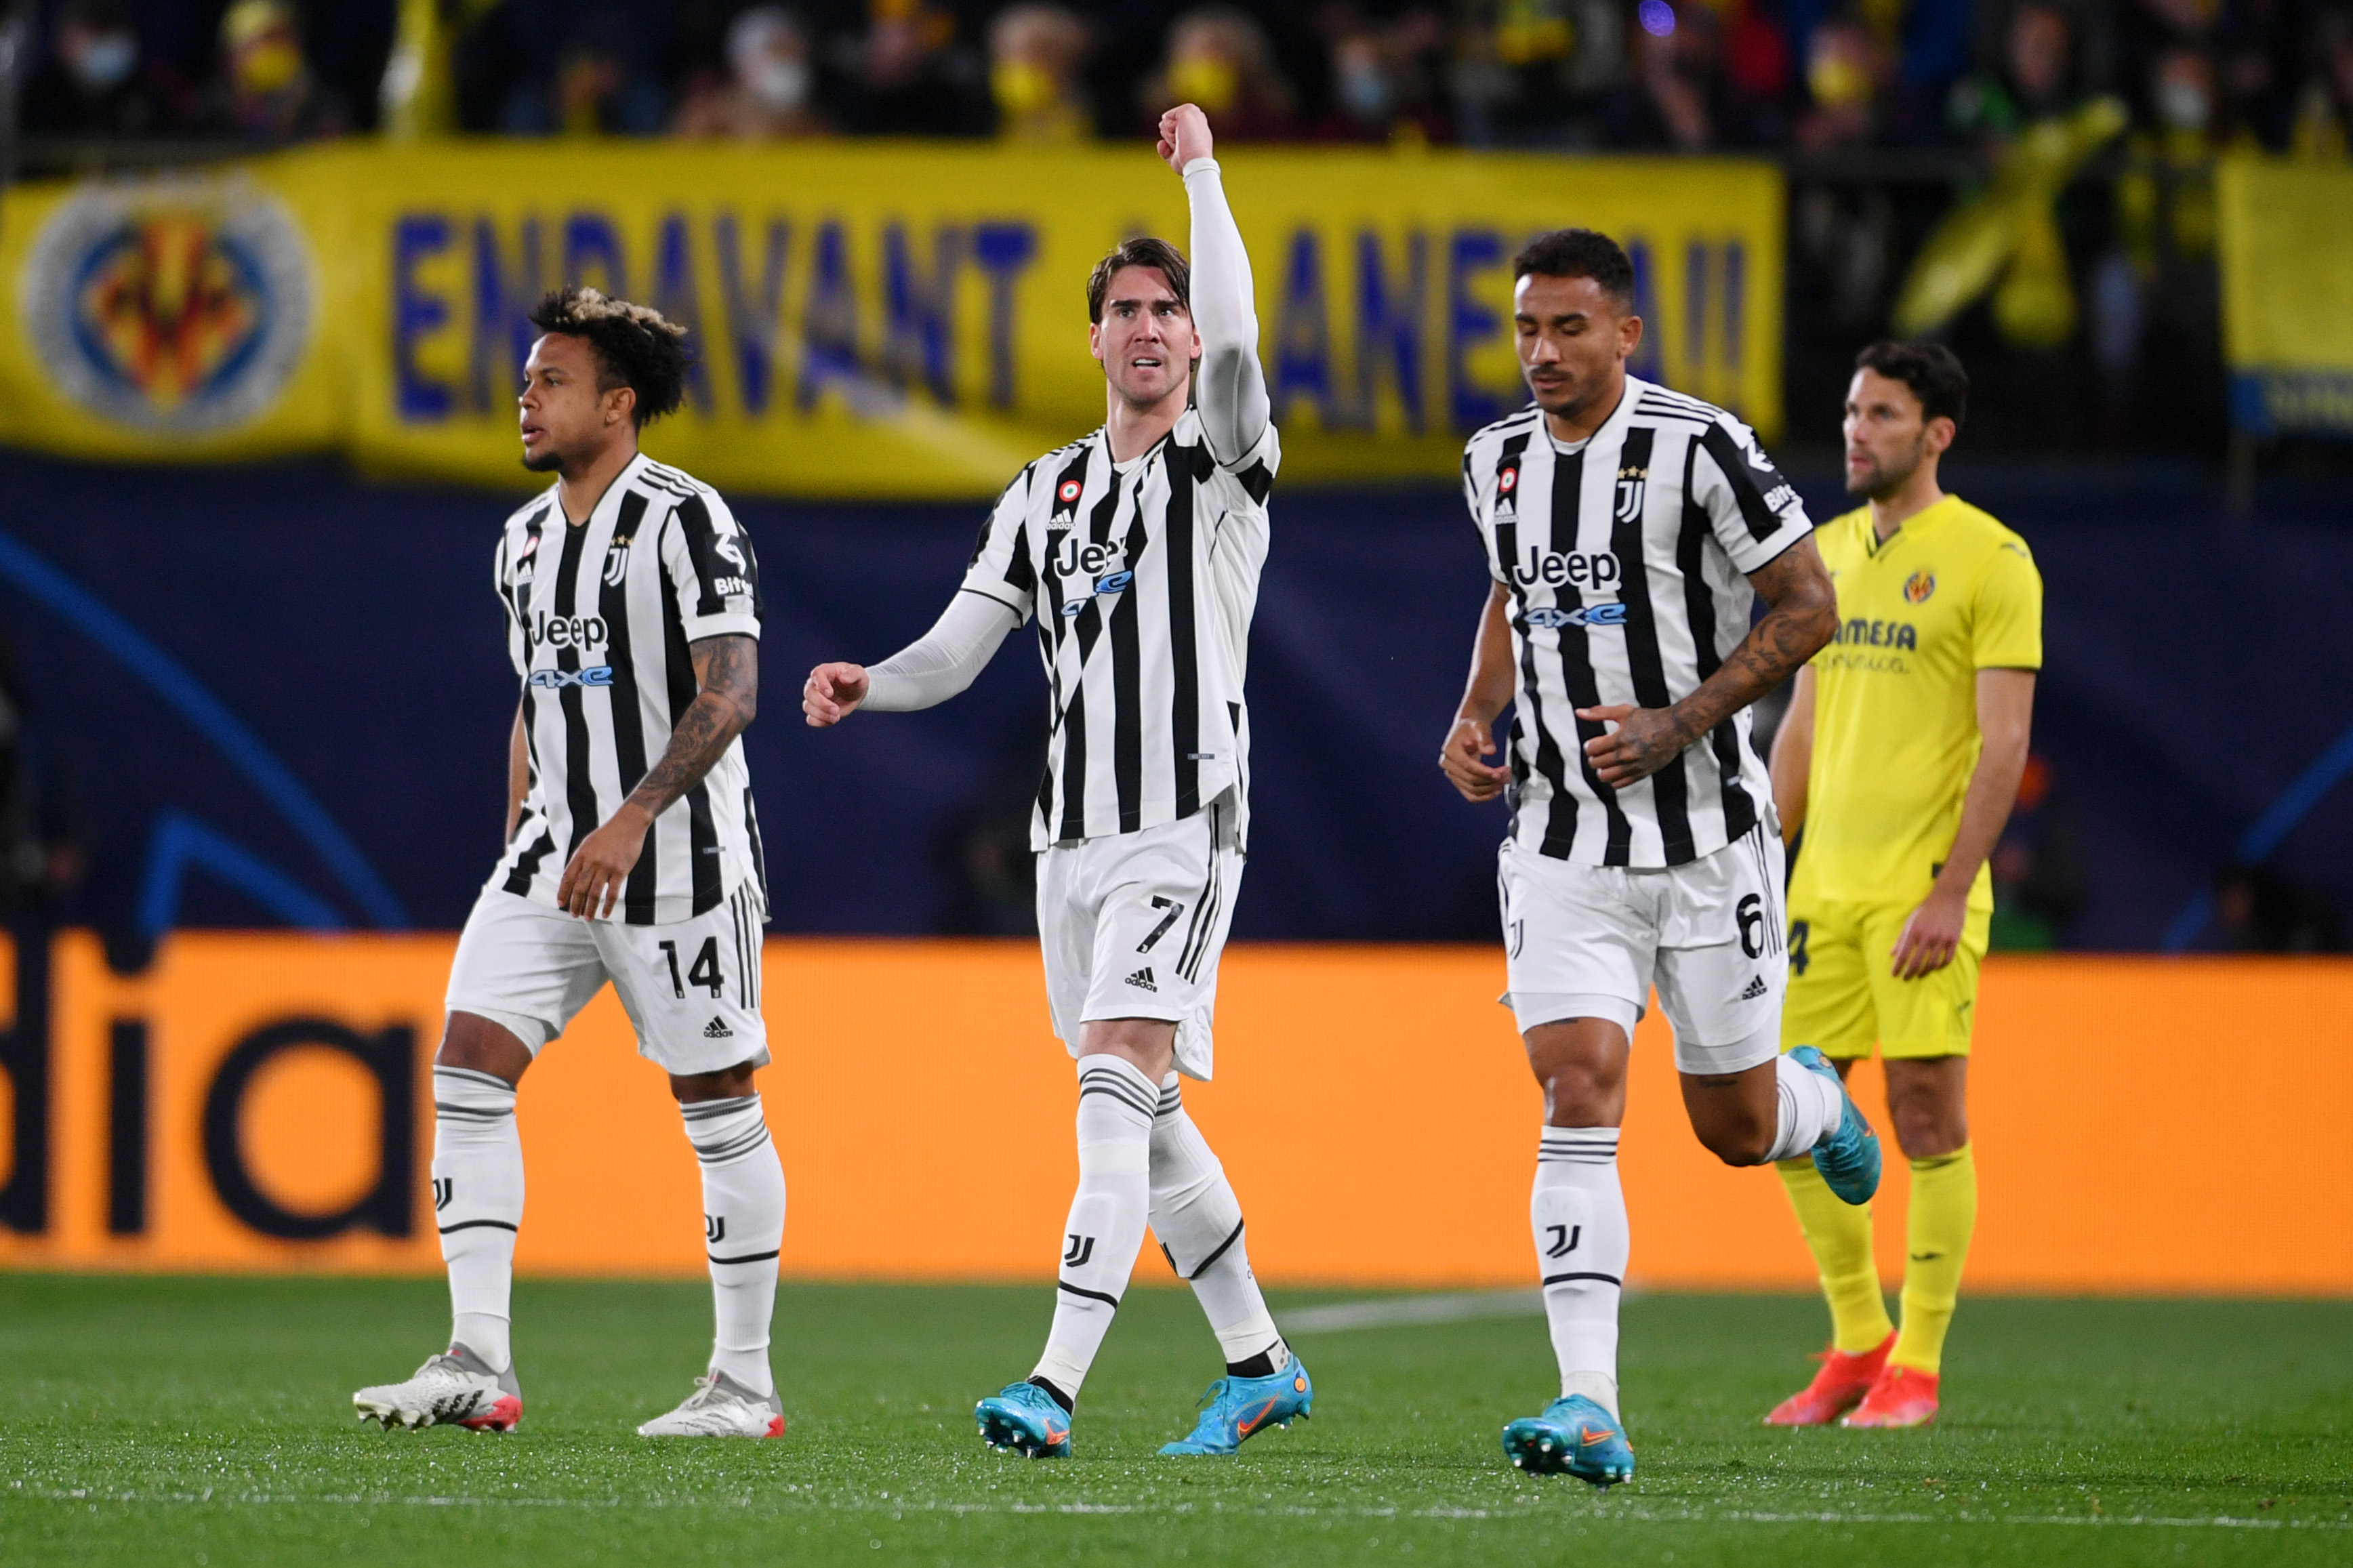 Villarreal 1-1 Juventus Highlights: Dusan Vlahovic scored his first Champions League goal in 31 seconds for Juventus before Daniel Parejo equalised for Villarreal